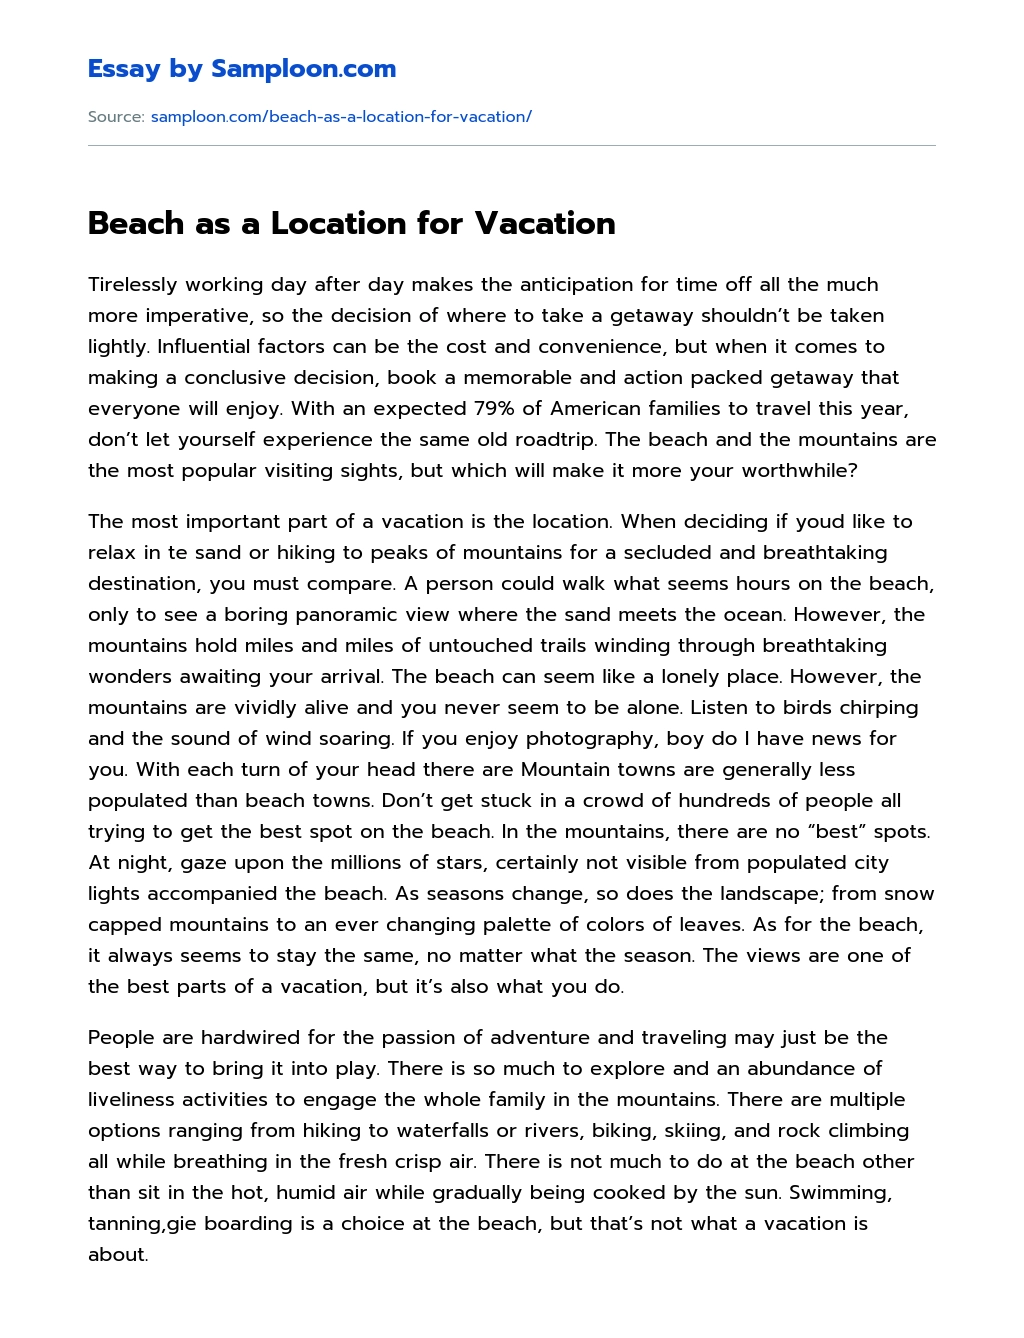 Beach as a Location for Vacation essay